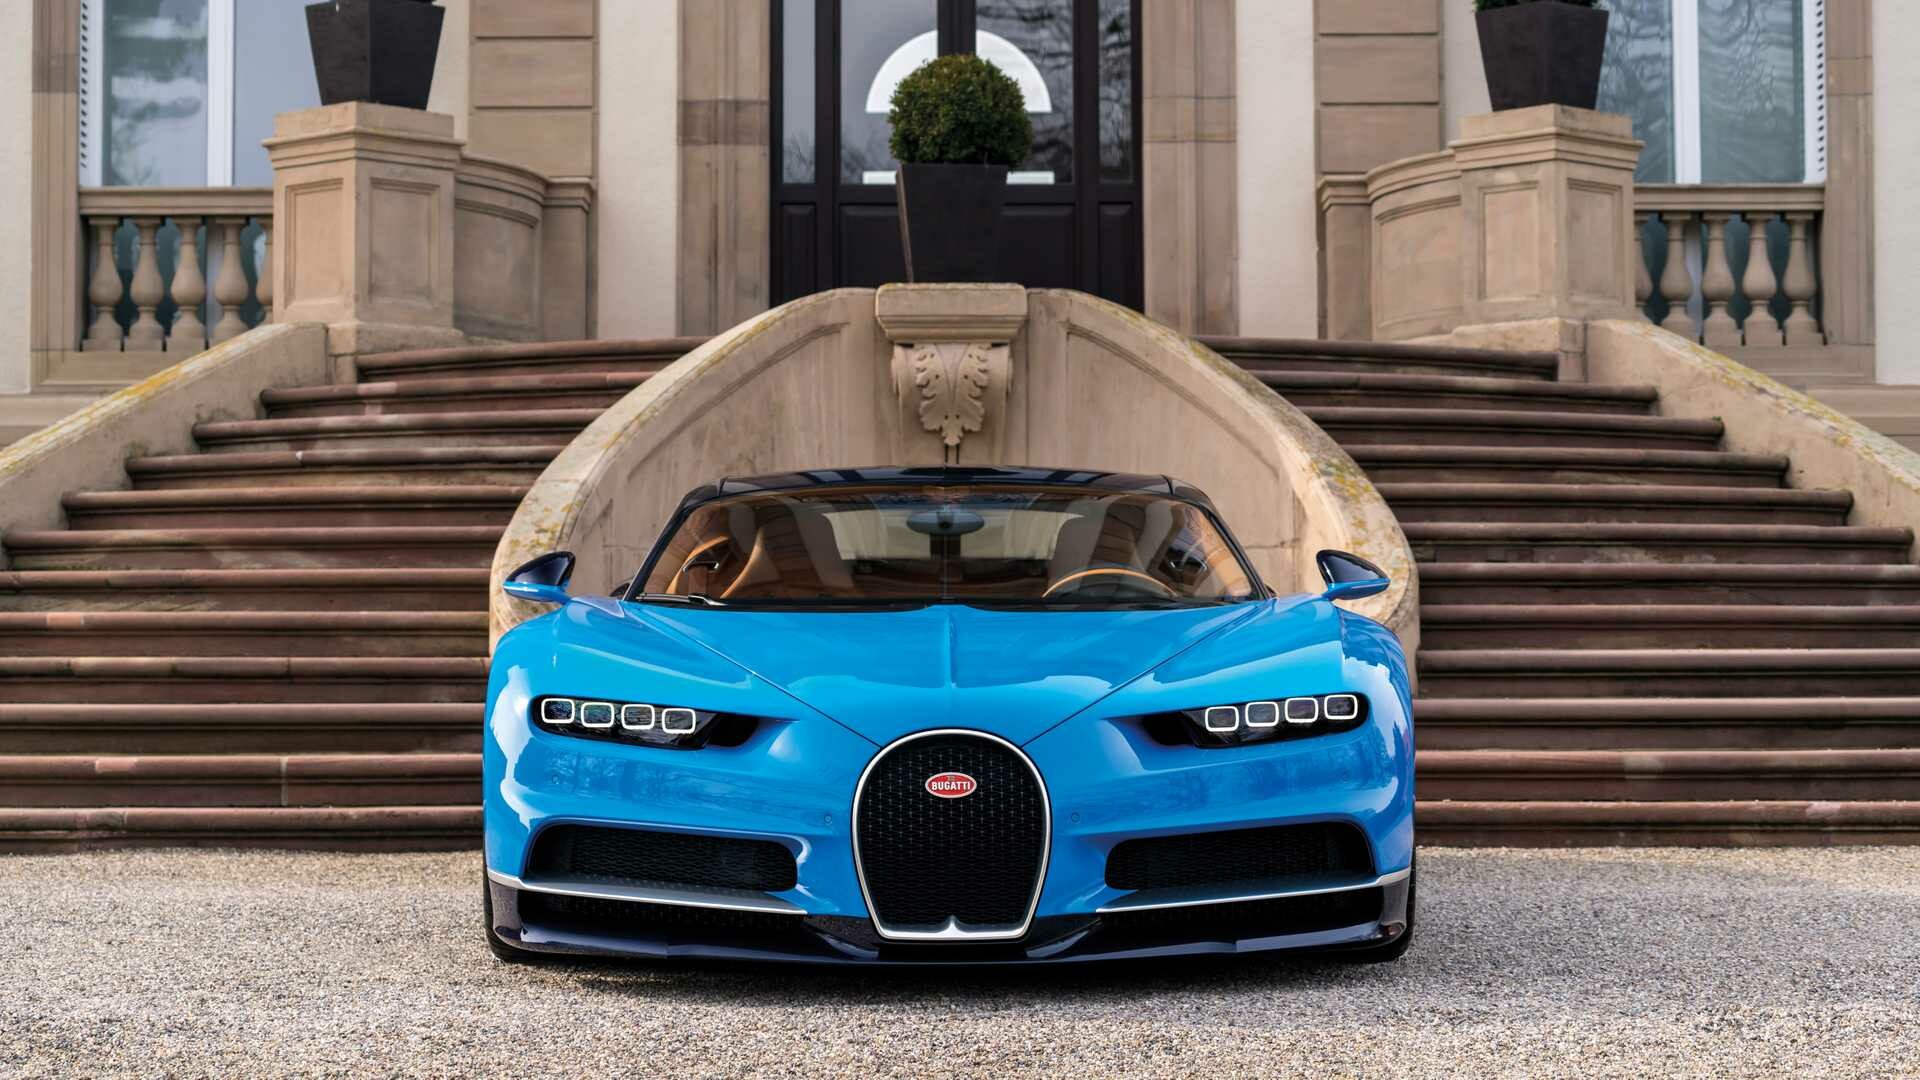 Bugatti: Chiron model, A French-registered, wholly-owned subsidiary of Volkswagen AG. 1920x1080 Full HD Wallpaper.